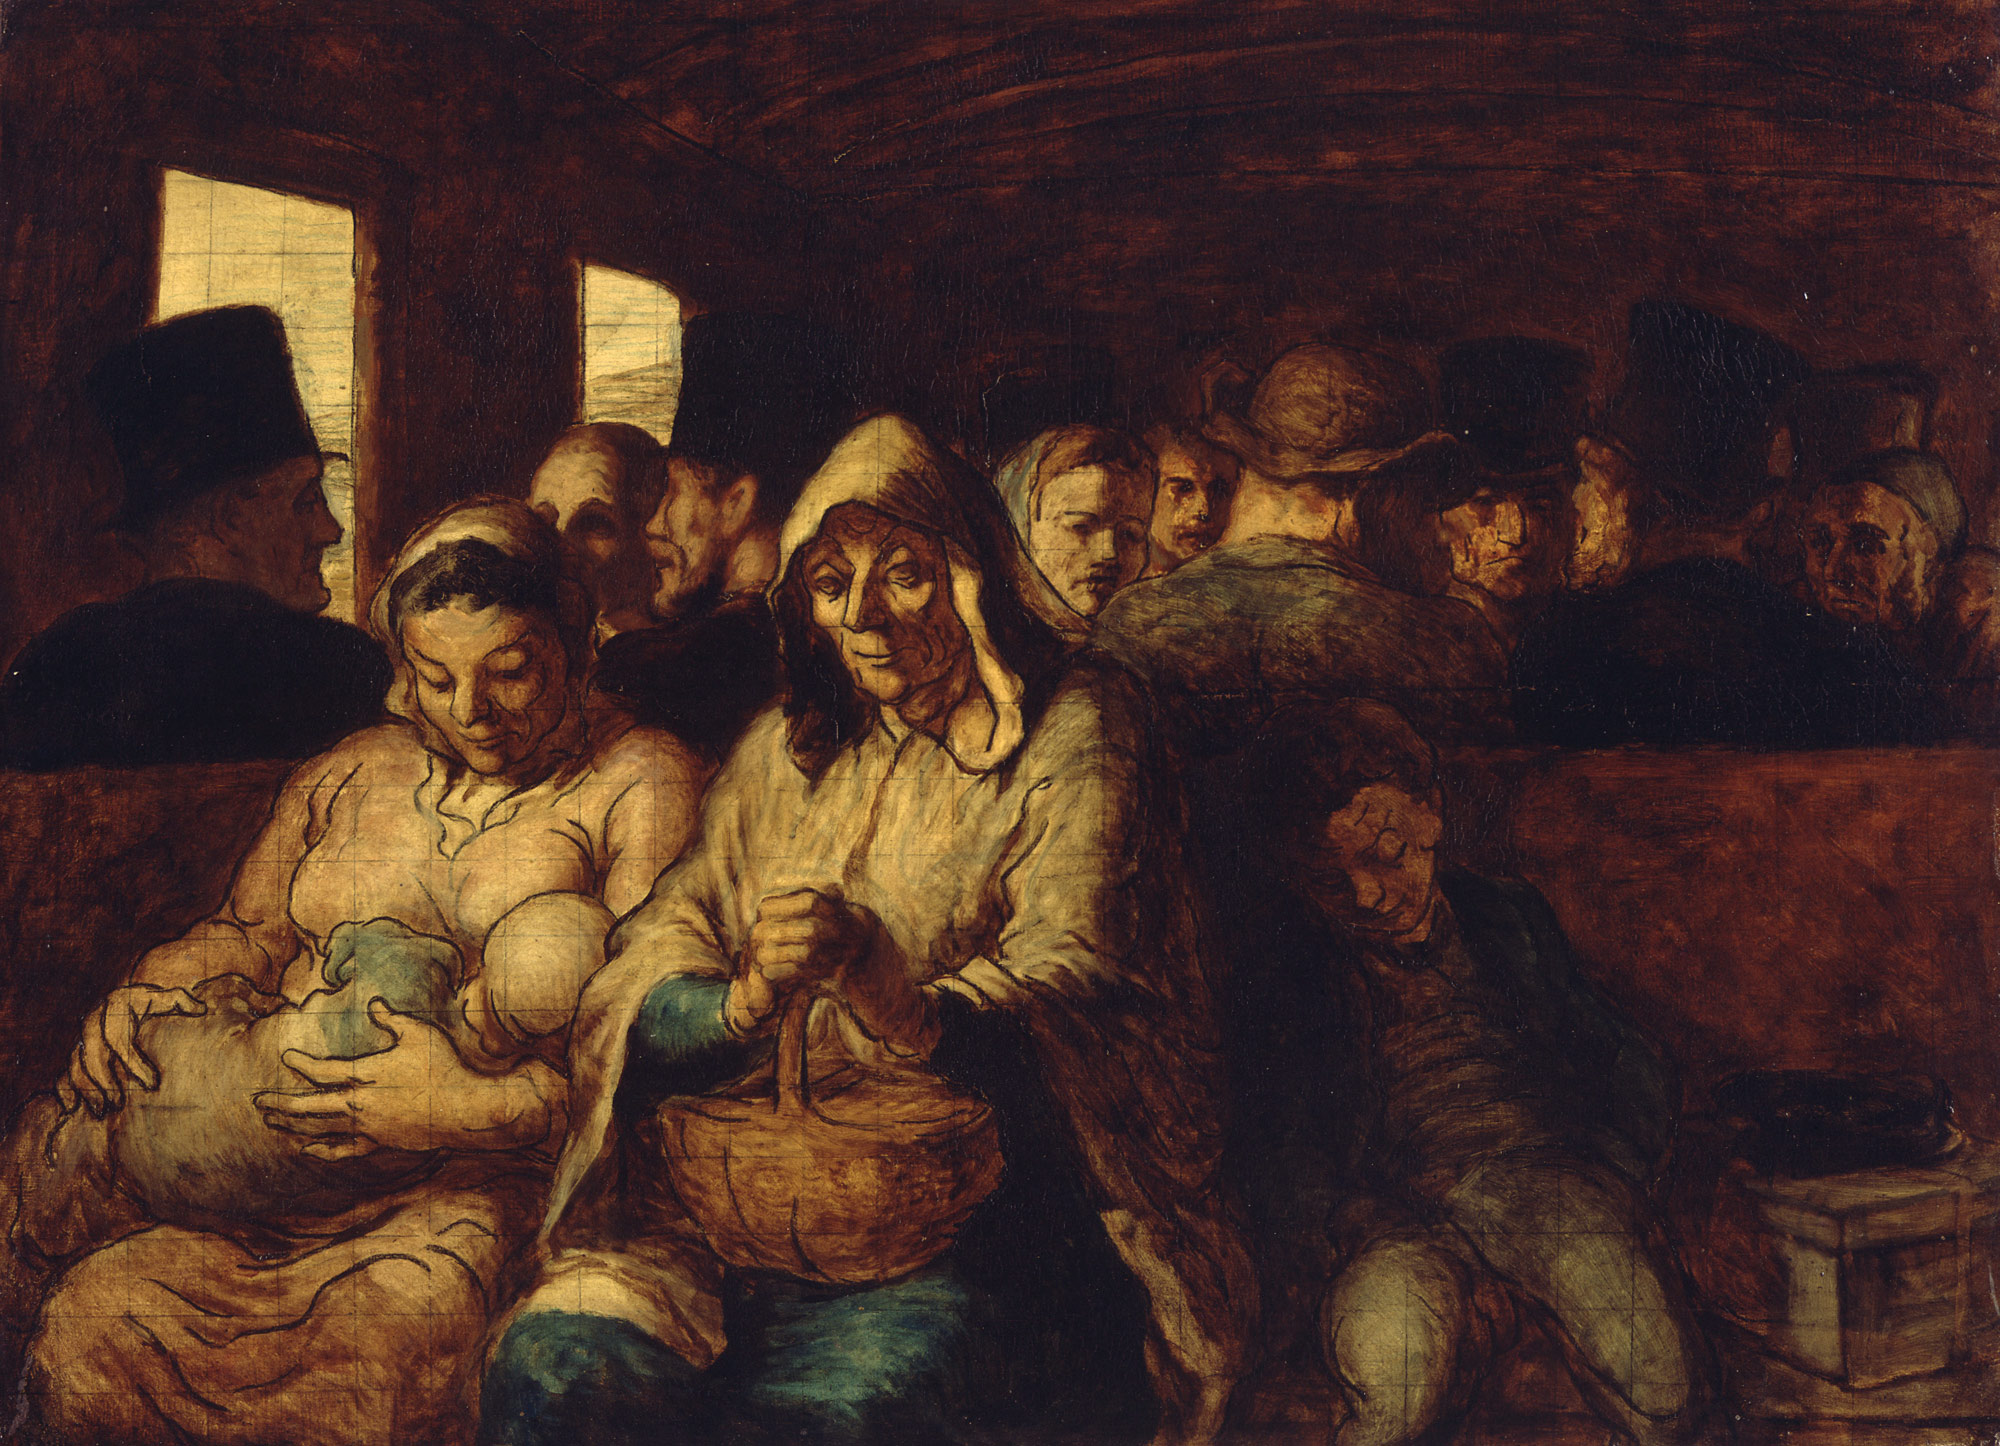 The ThirdClass Carriage Honoré Daumier 29.100.129 Work of Art